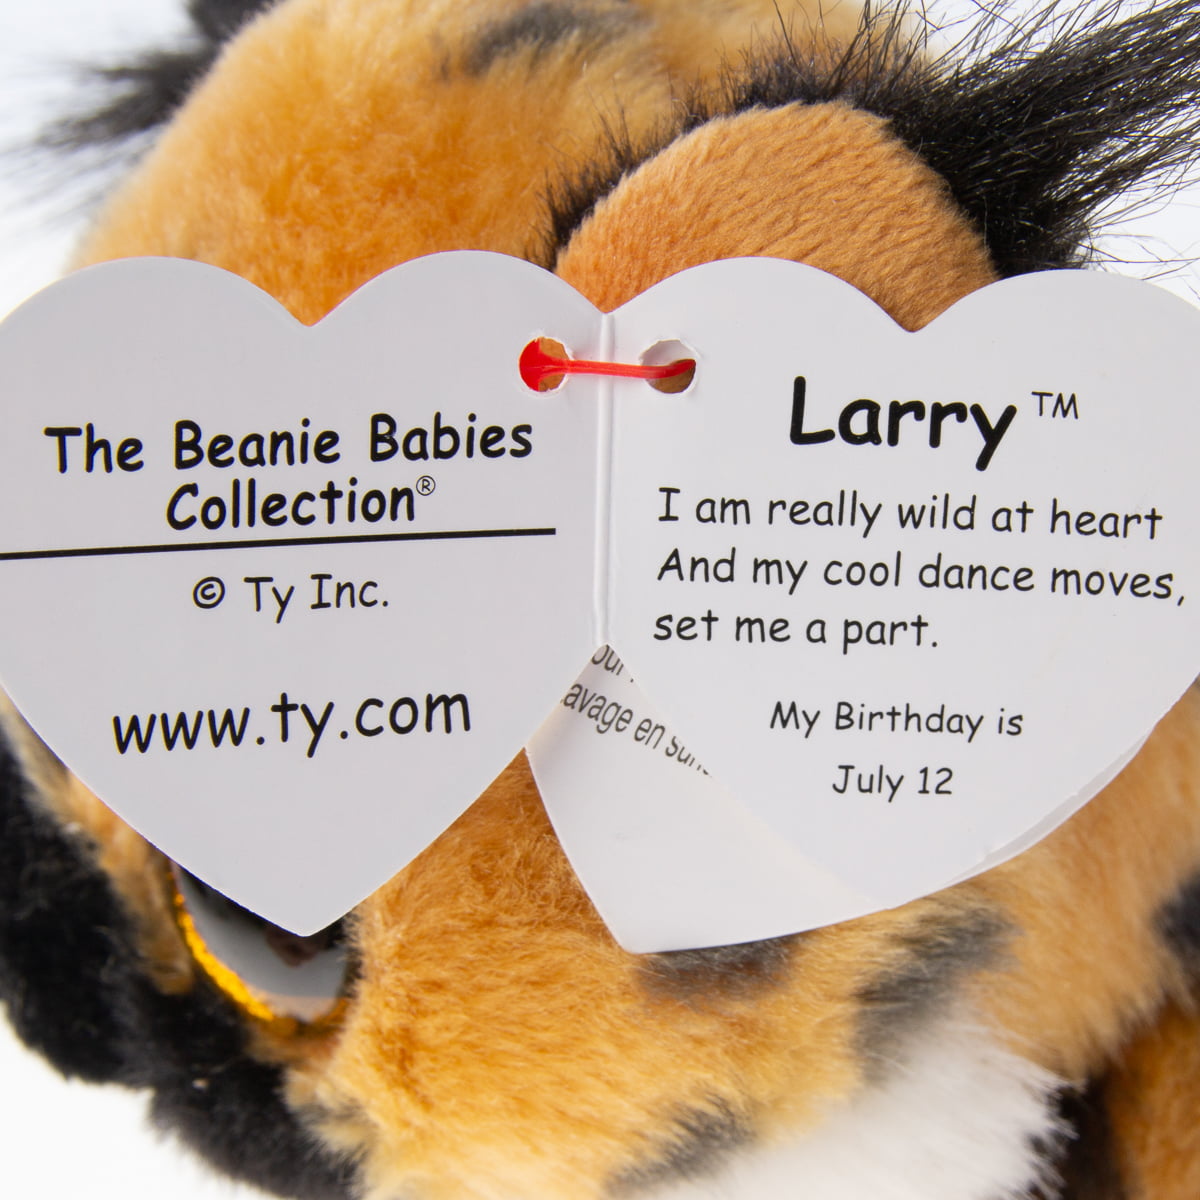 Larry Lynx Beanie Babies 8 Inch Stuffed Animal by Ty 41205 for sale online 